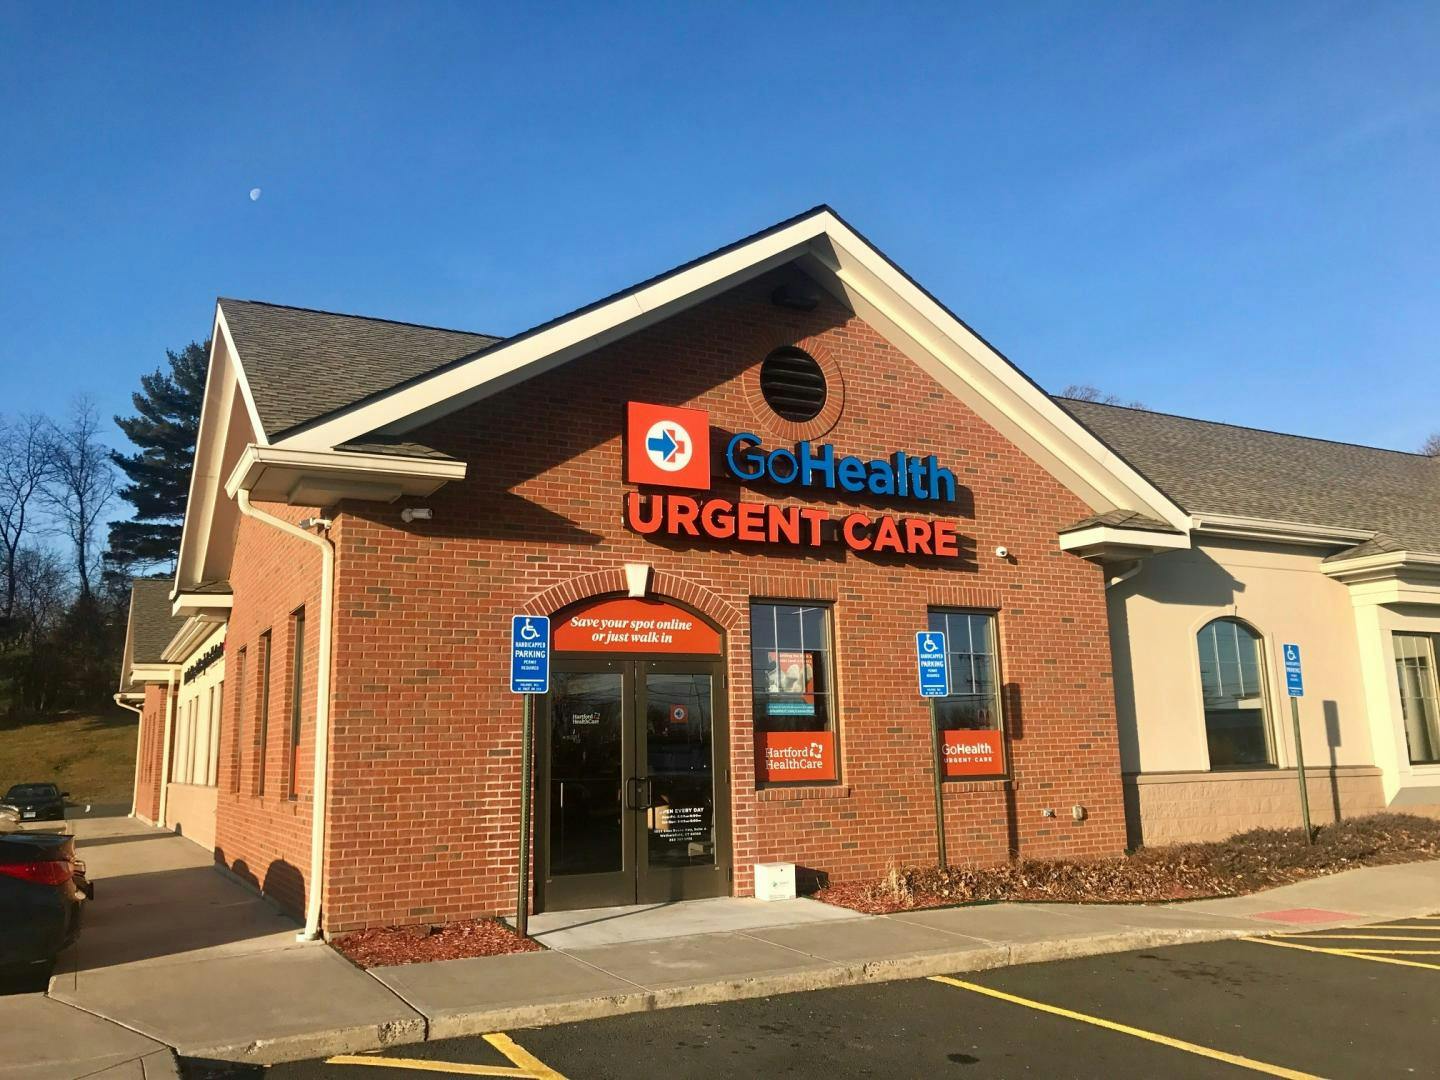 Urgent Care in Wethersfield Hartford Healthcare - GoHealth Urgent Care